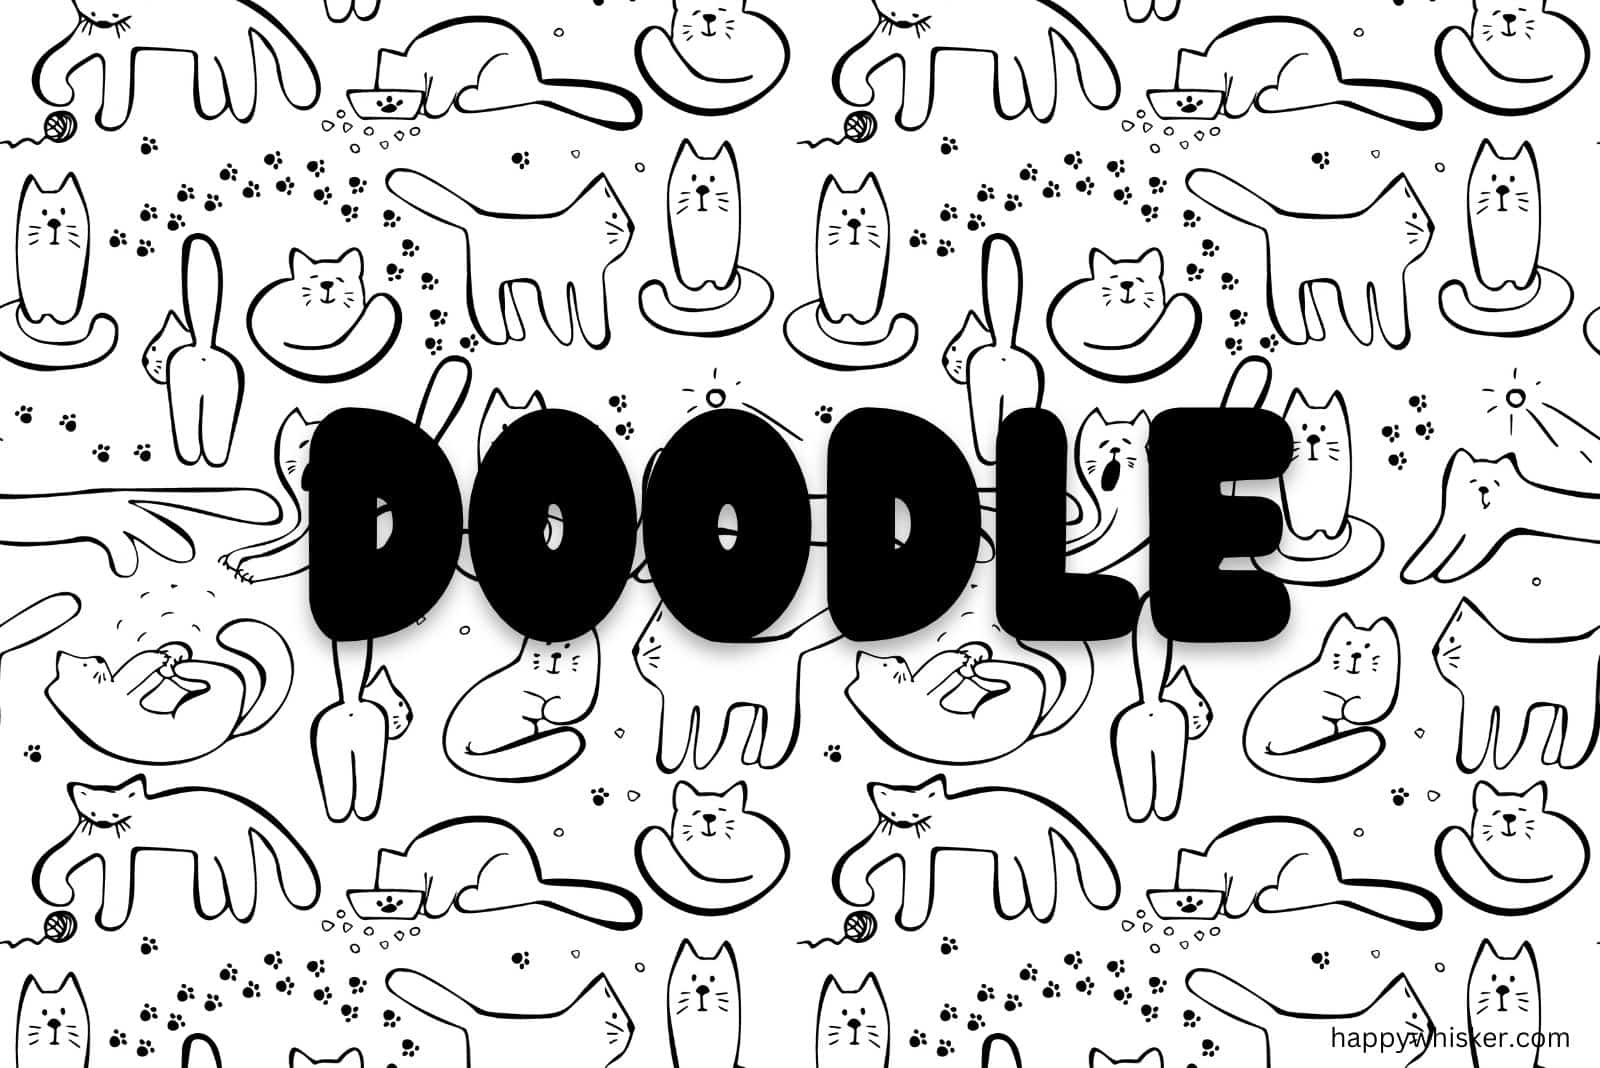 black doodle with cats on white background